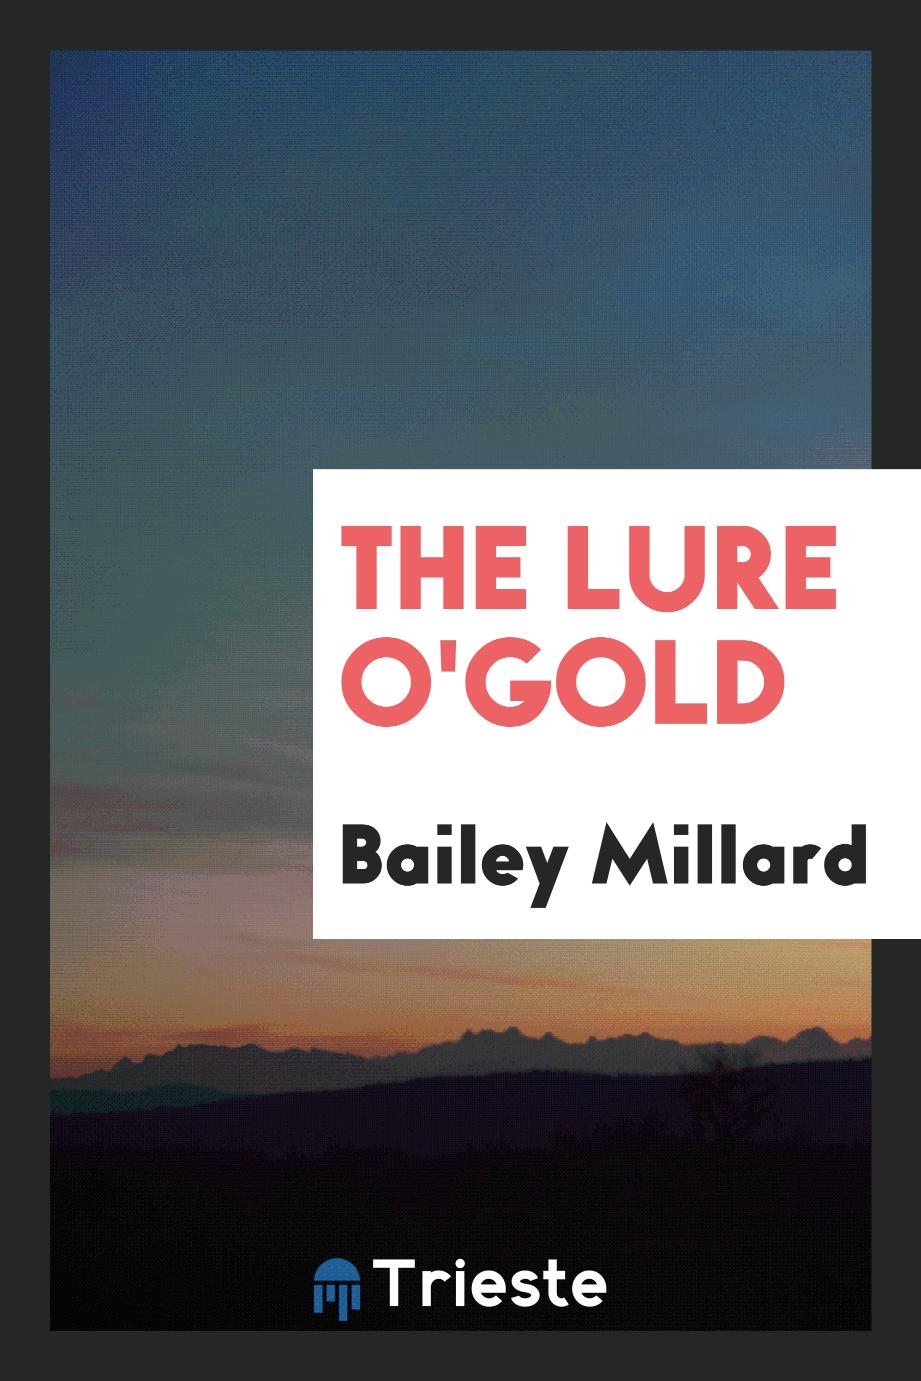 The lure o'gold